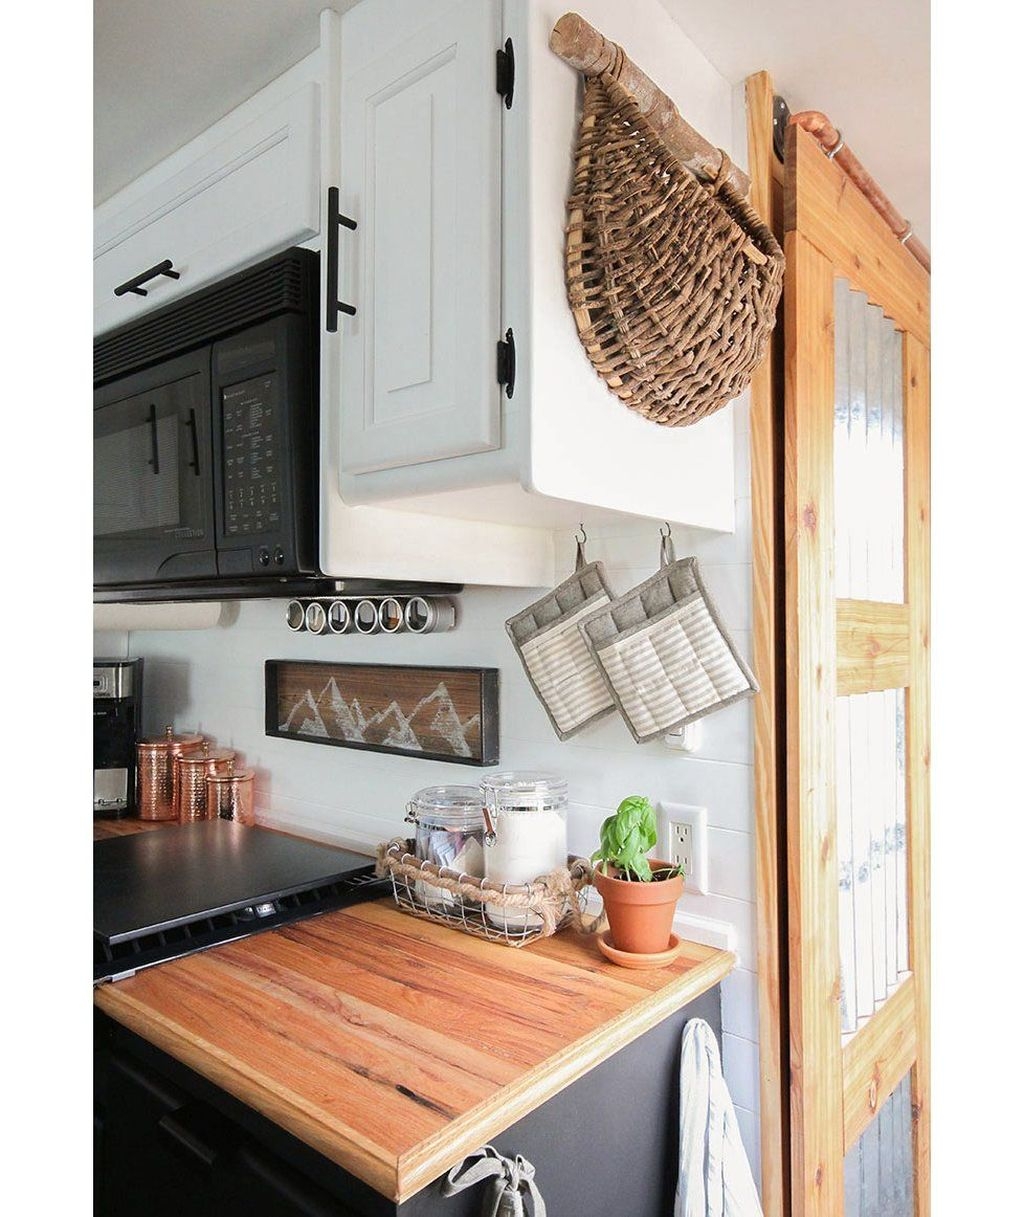 Best RV Kitchen Storage Ideas For Cozy Cook When The Camping 13